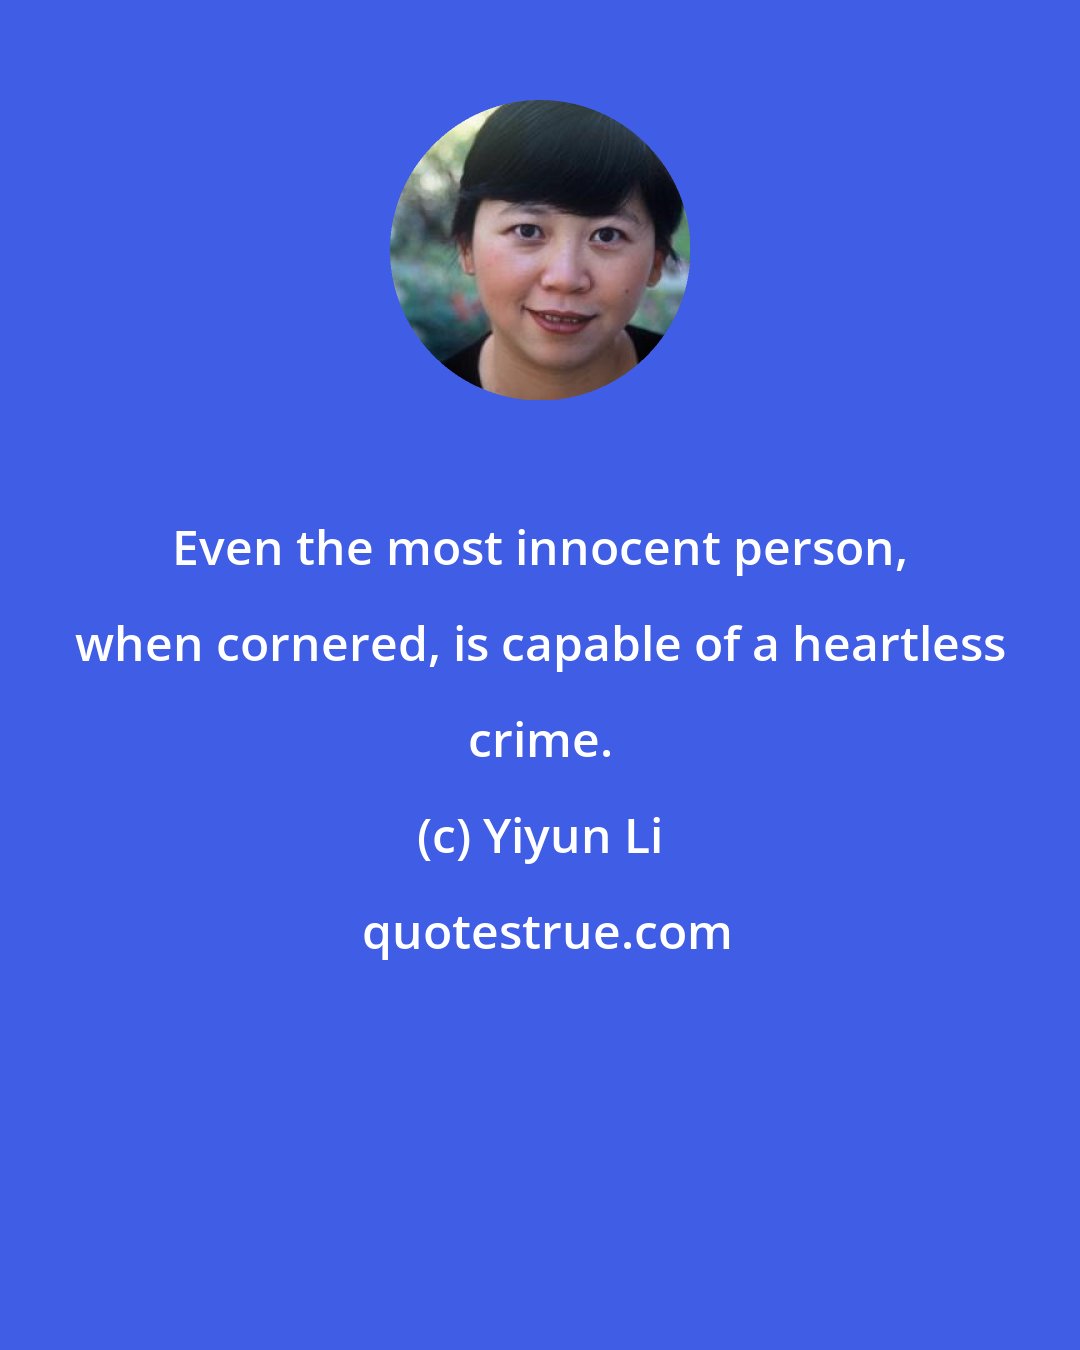 Yiyun Li: Even the most innocent person, when cornered, is capable of a heartless crime.